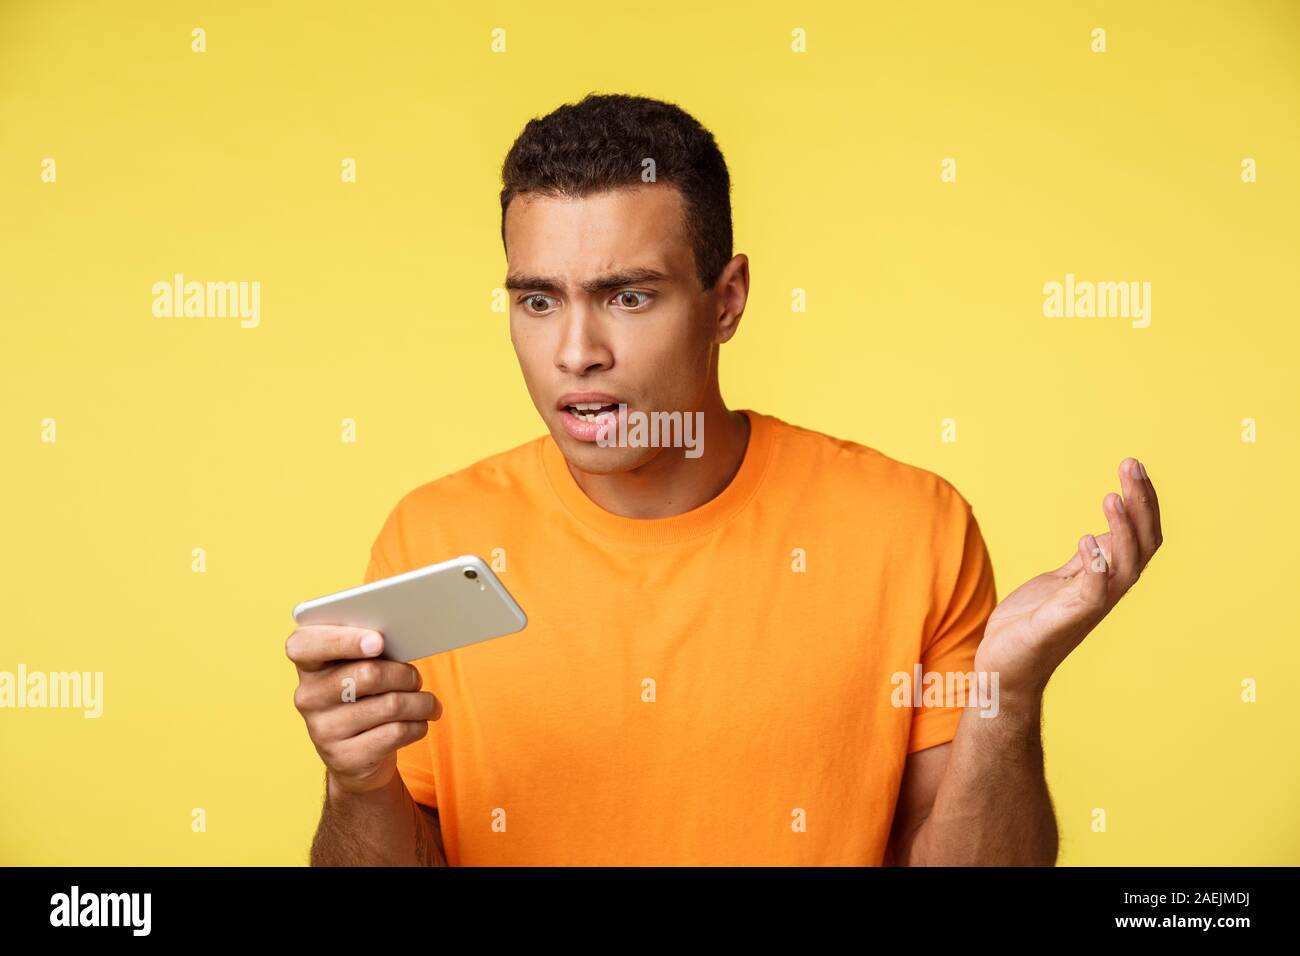 Shocked and bothered, upset handsome guy in orange t-sirt, stare at mobile screen questioned and sad, losing, see bad news, raise hands in dismay Stock Photo